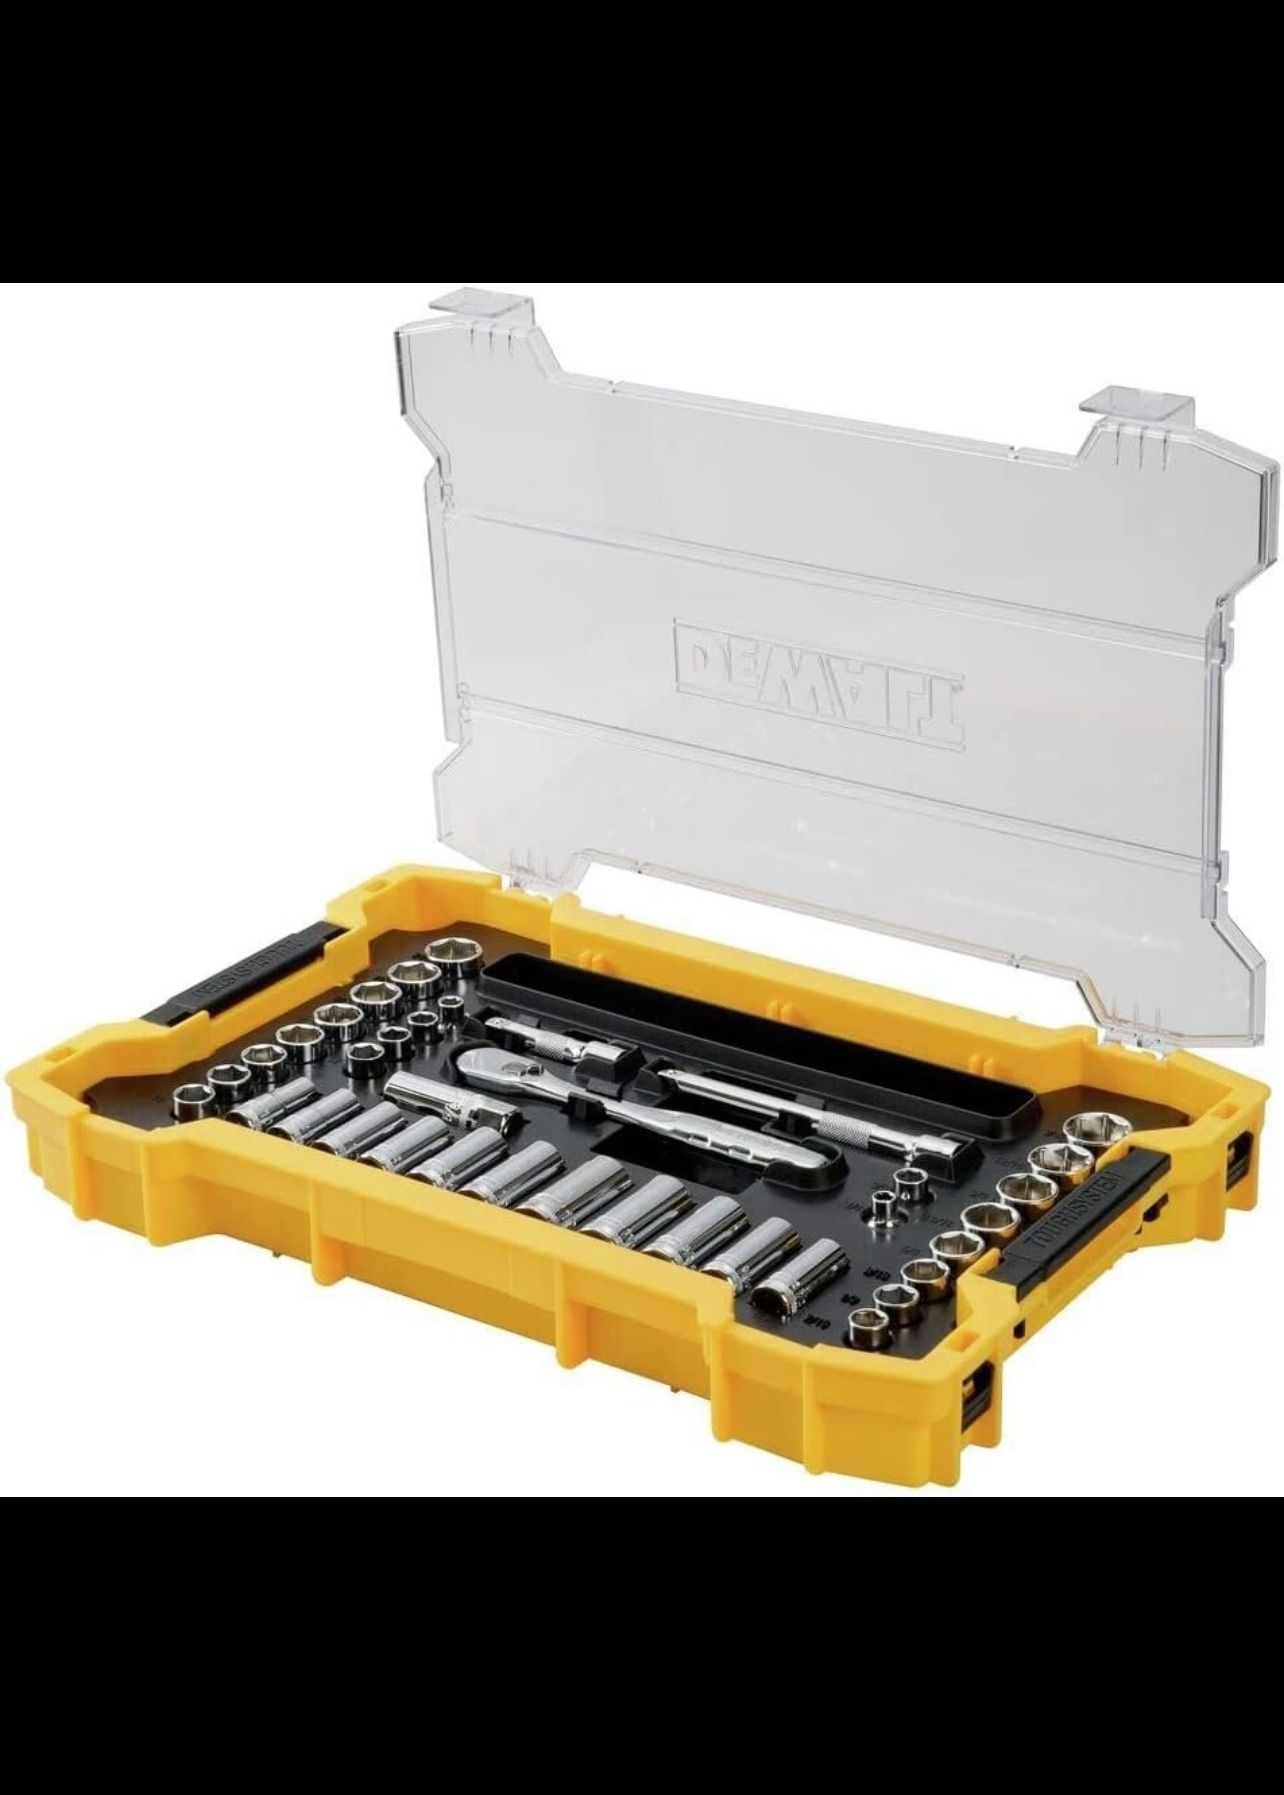 Dewalt 3/8 In. Drive Socket Set With Tough system Tray (37-pieces)